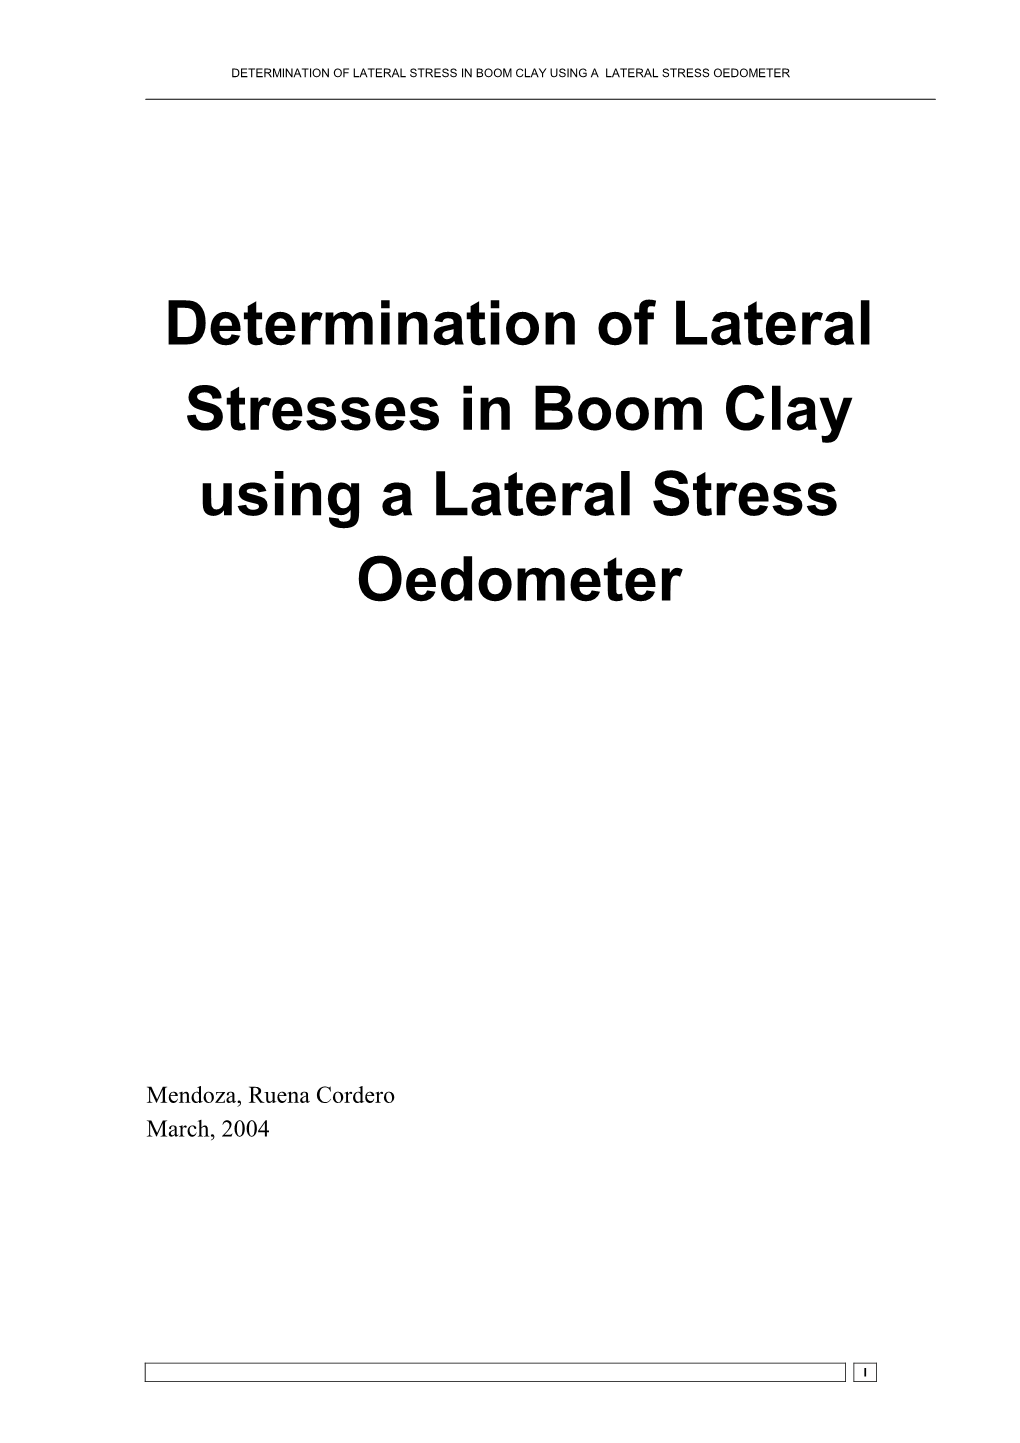 Determination of Lateral Stresses in Boom Clay Using a Lateral Stress Oedometer